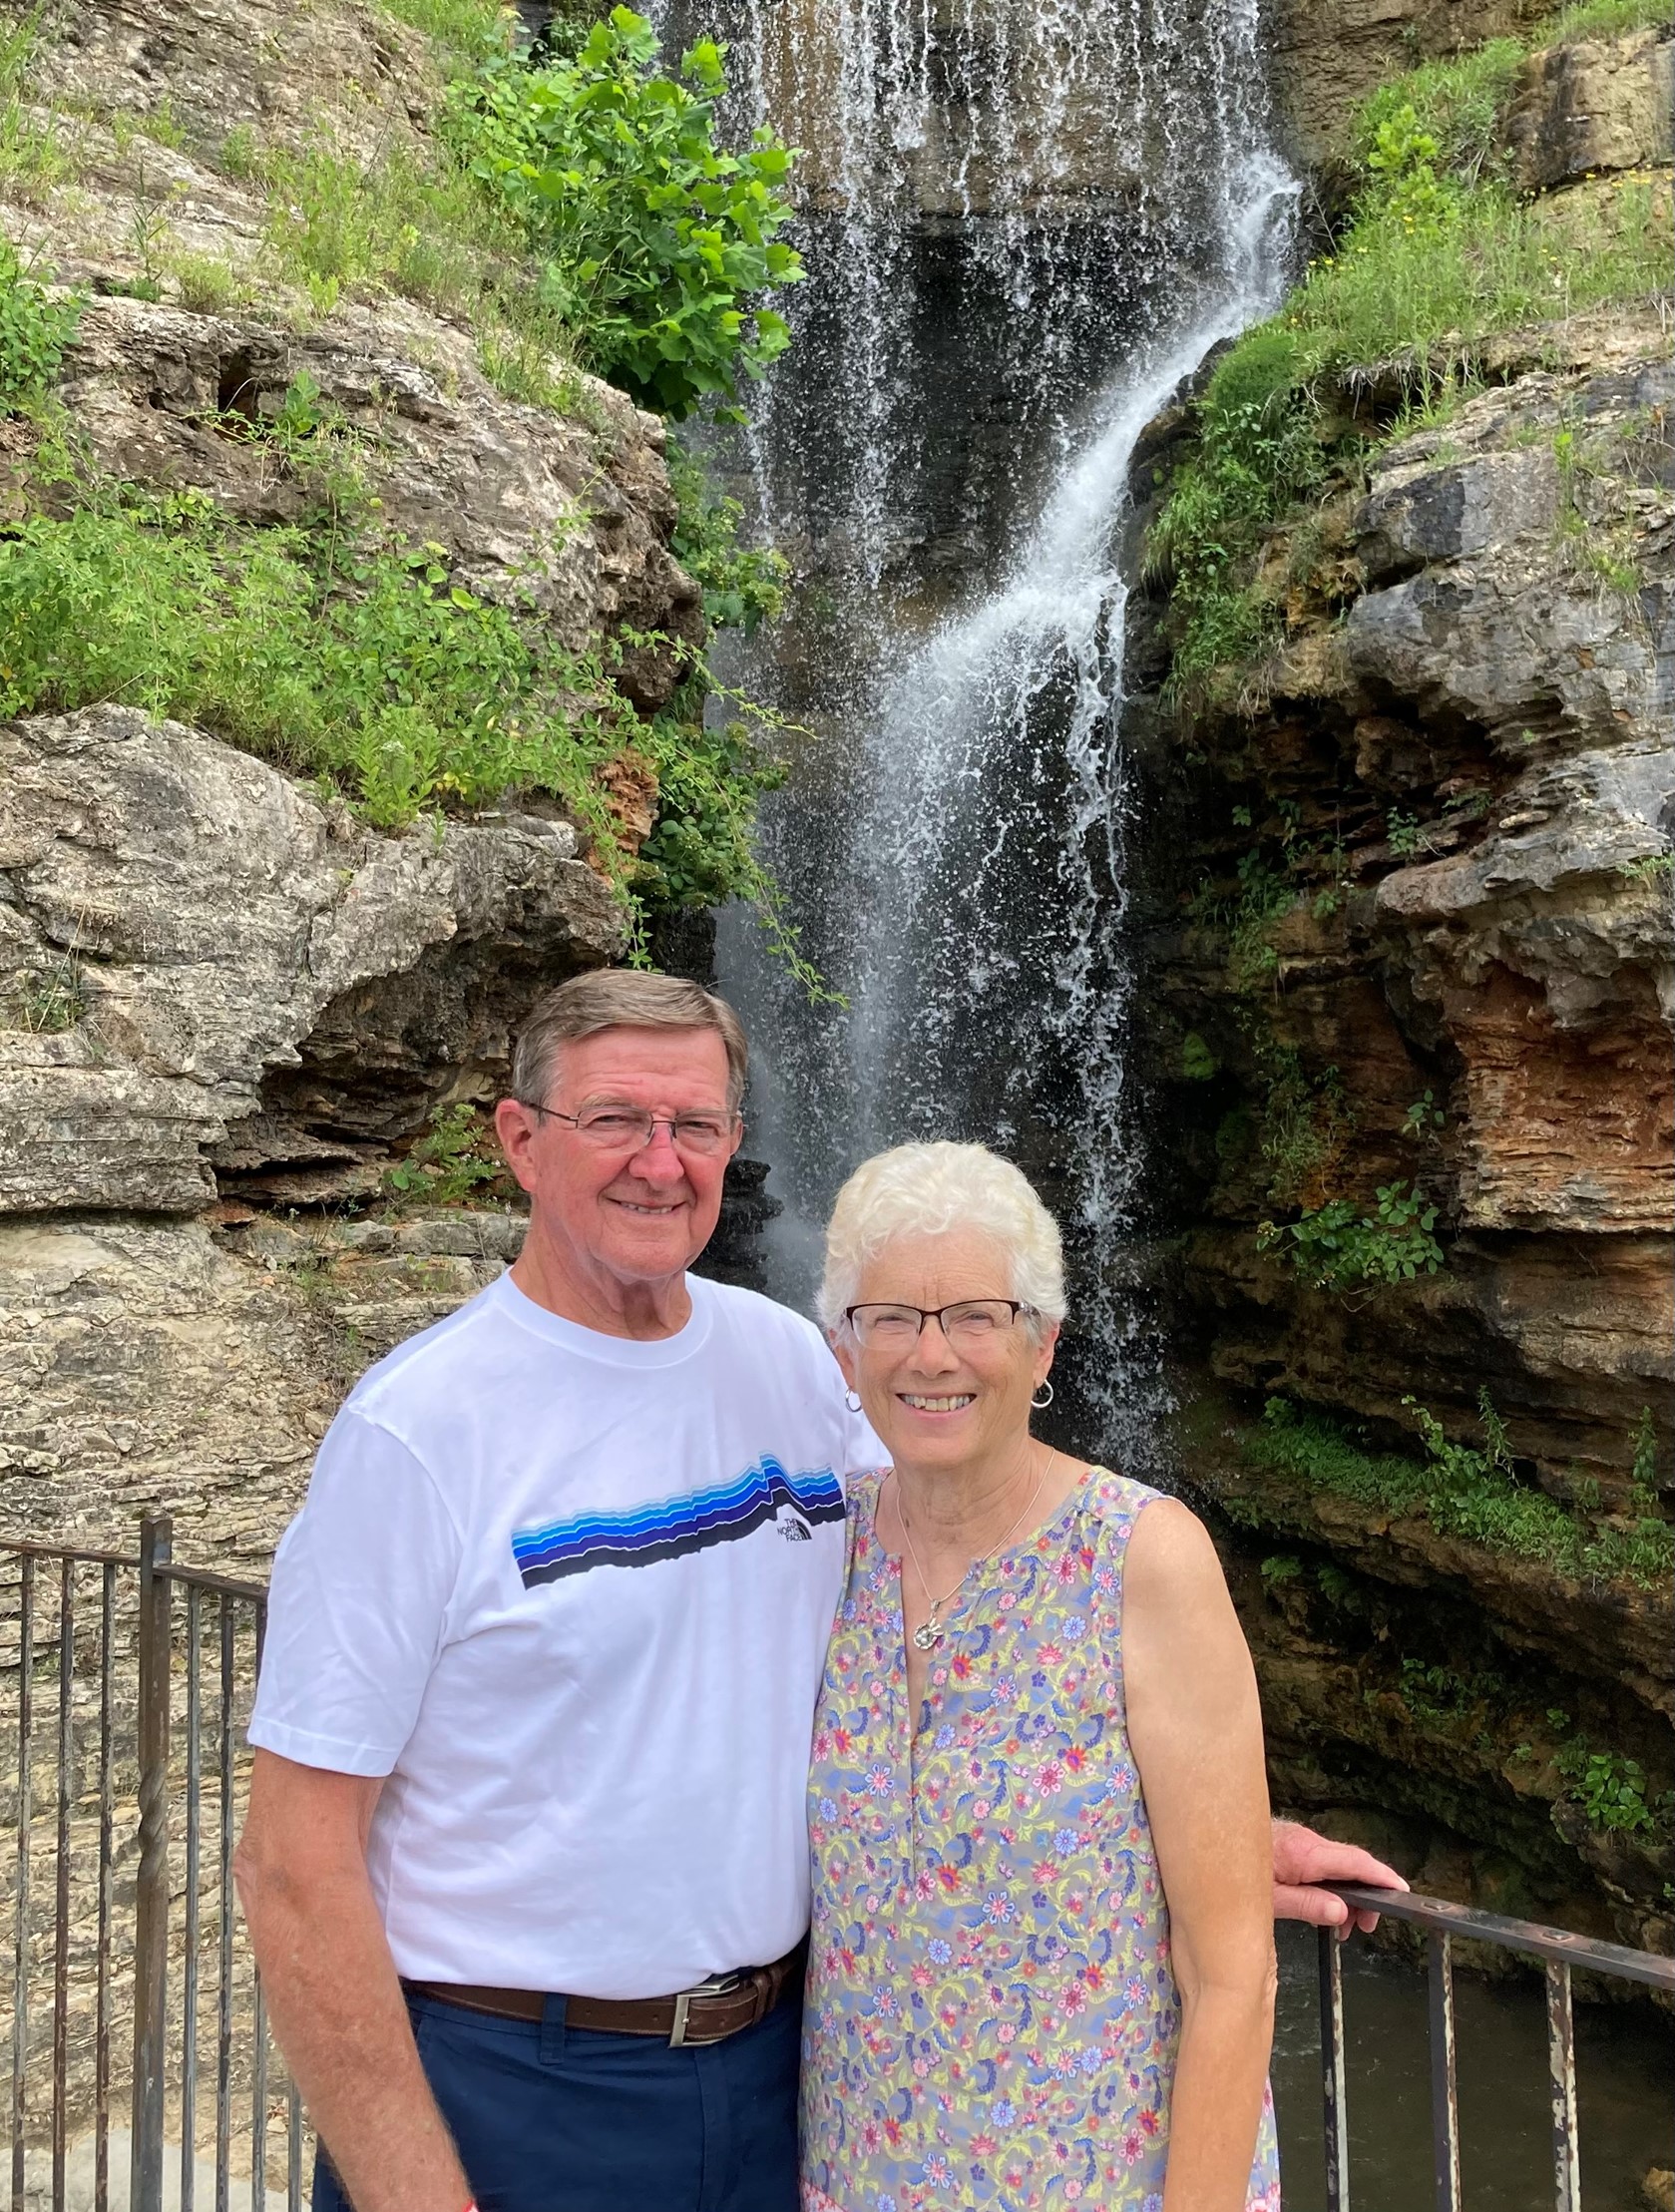 A northeastern Missouri couple, Ed and Janet Watson, celebrated their 55th anniversary by learning about forestry at a field day offered by University of Missouri Extension and the Missouri Department of Conservation. (Photo courtesy of Brian Schweiss.)